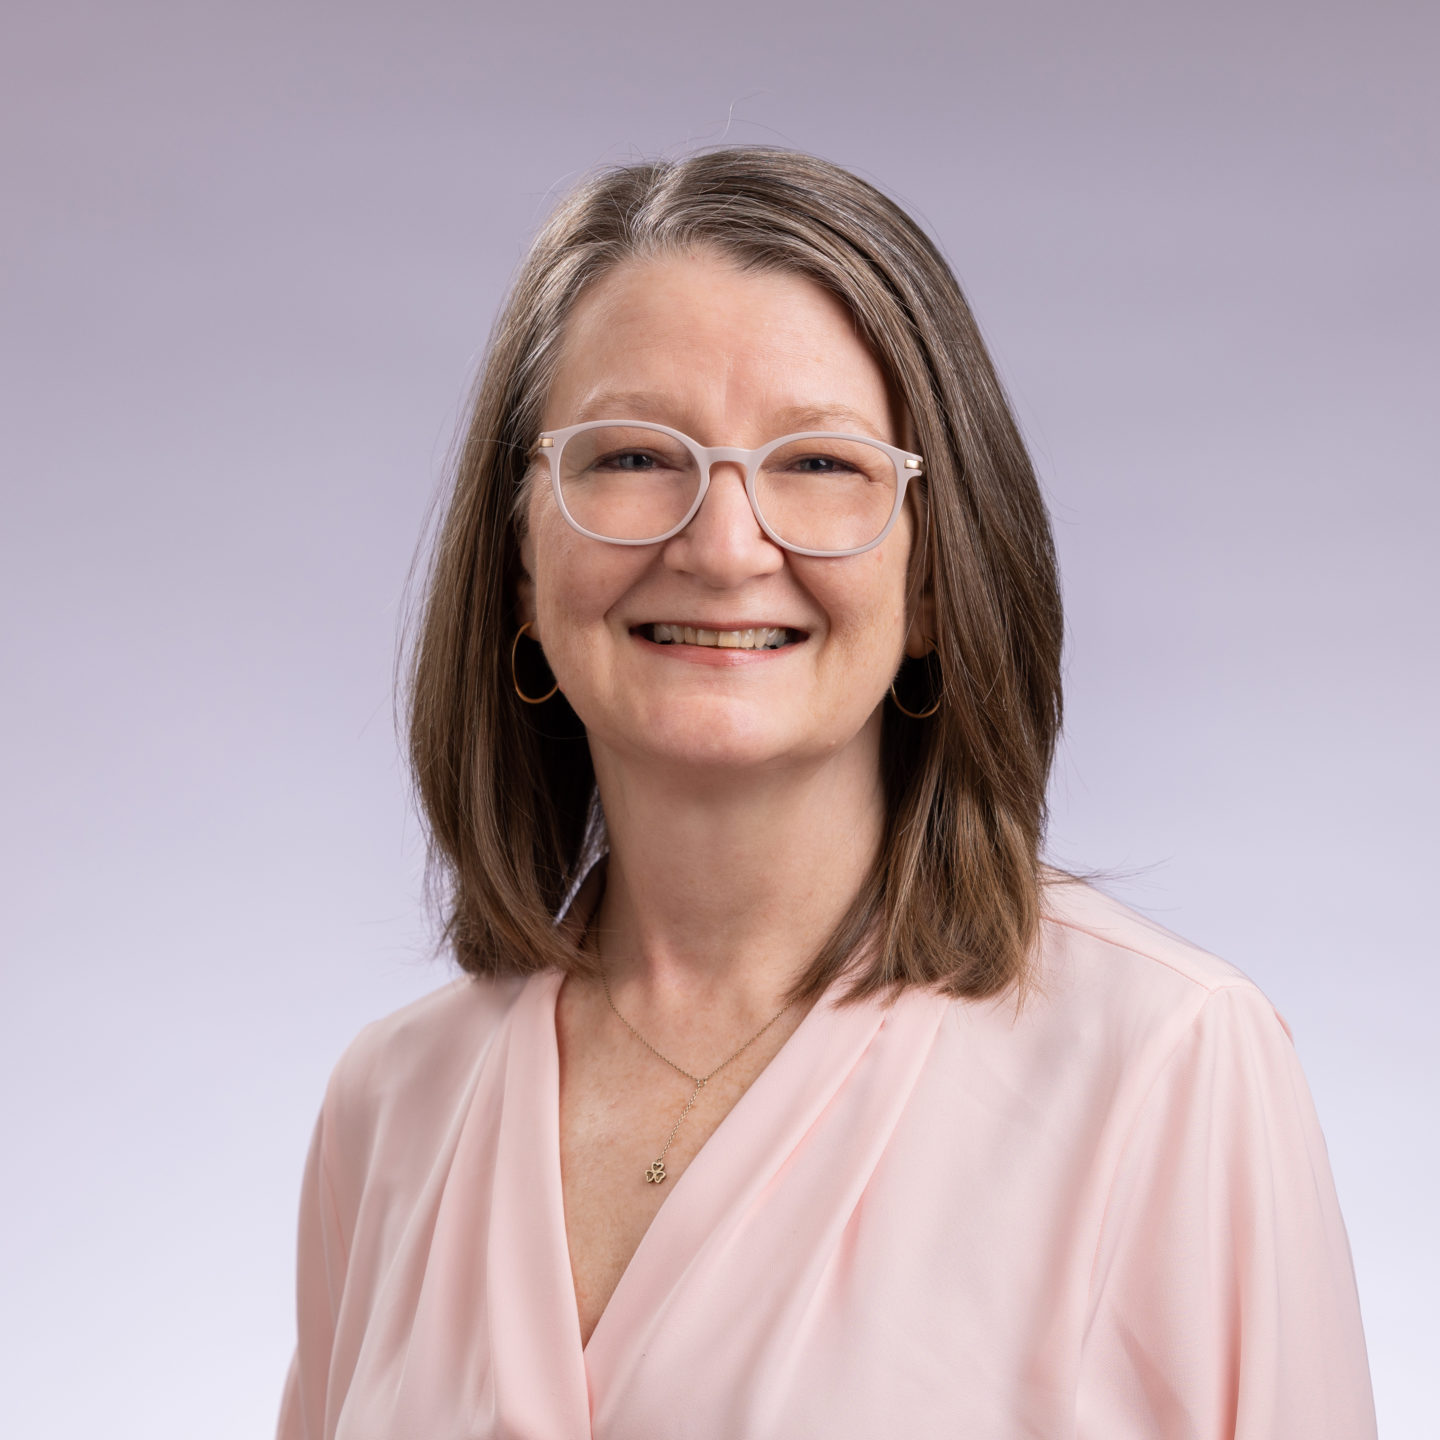 Professional photo of Maureen Green in a pink shirt in front of a white background